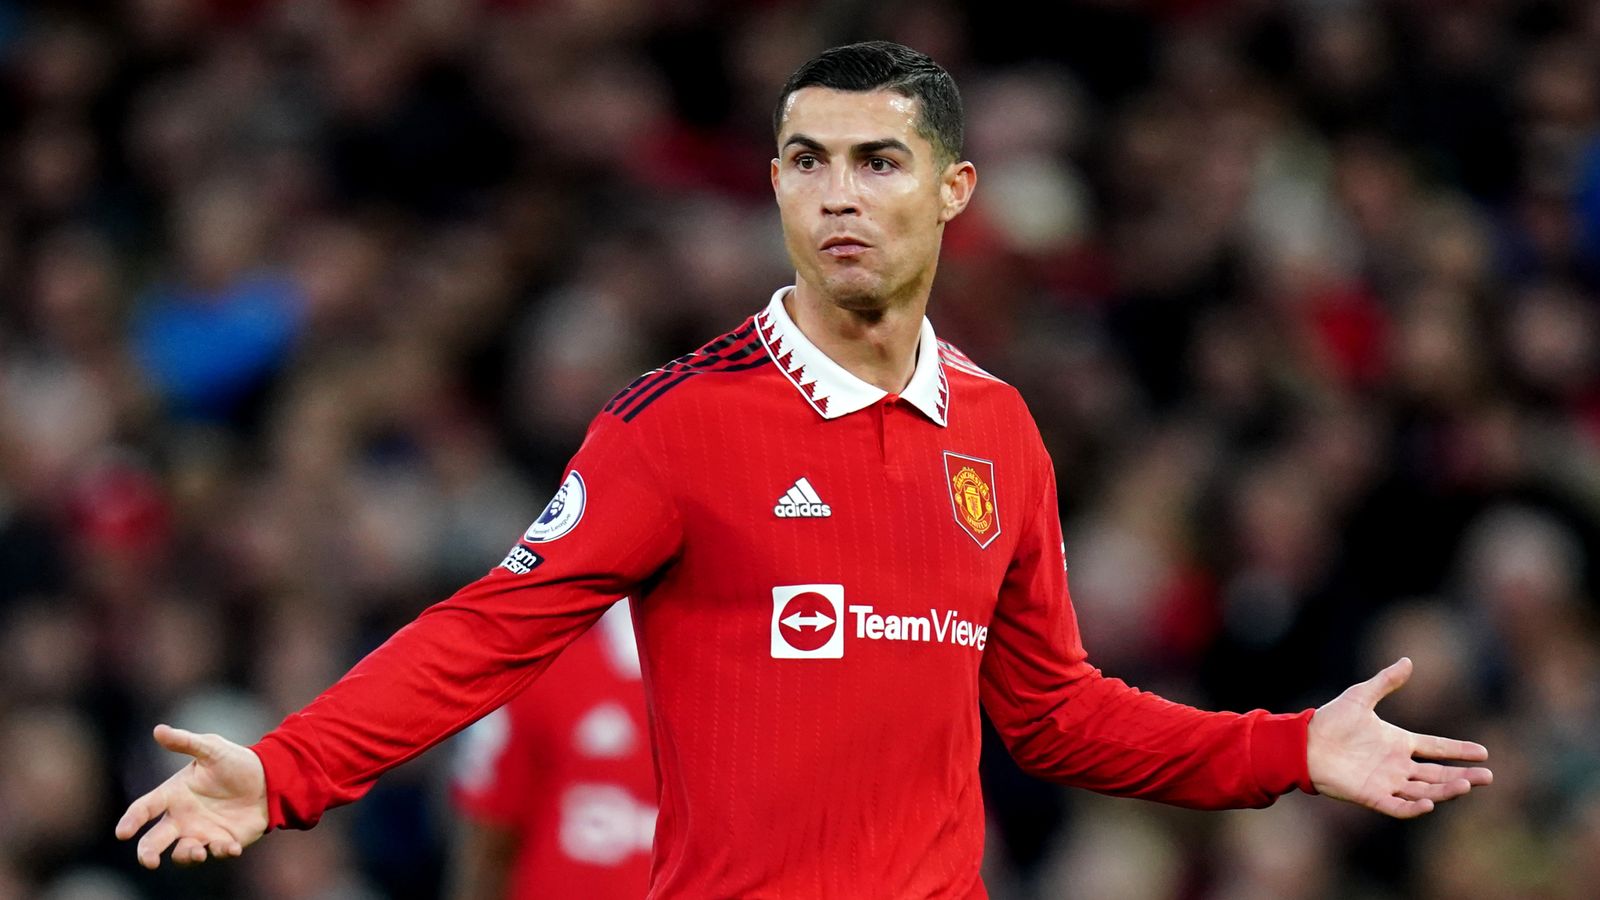 Cristiano Ronaldo says Manchester United owners, the Glazers, 'don't care about the club'